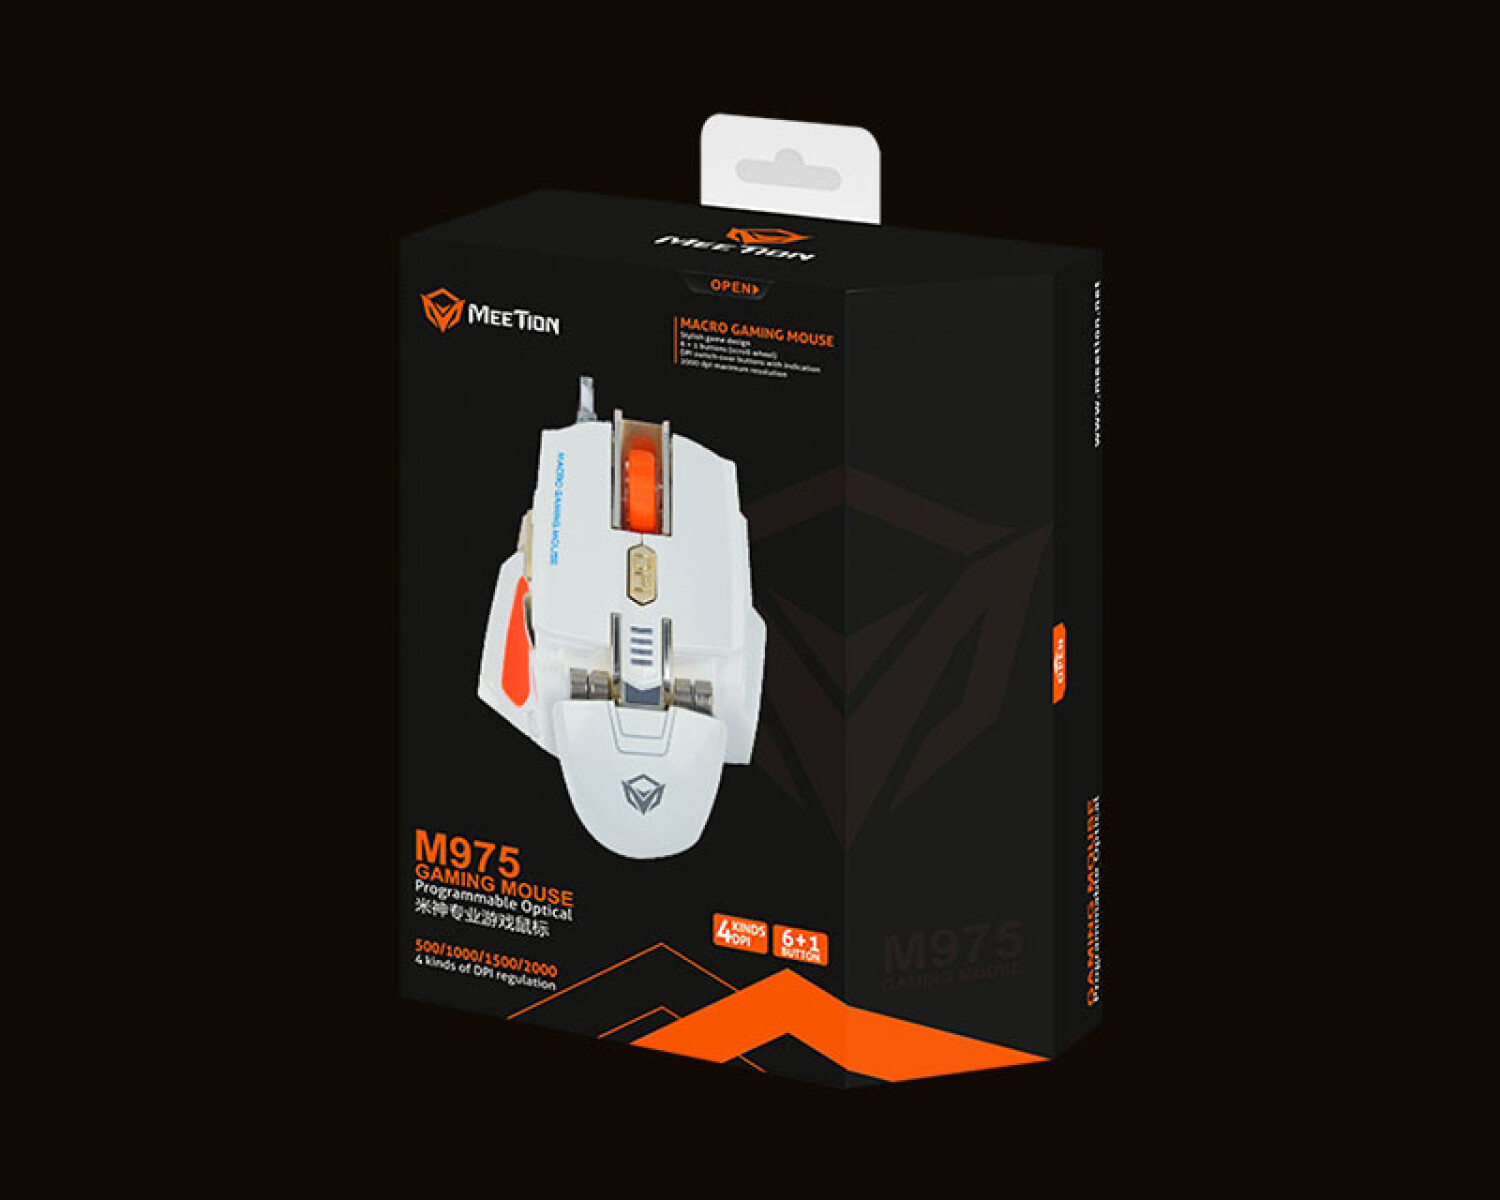 MOUSE PRO GAMING 